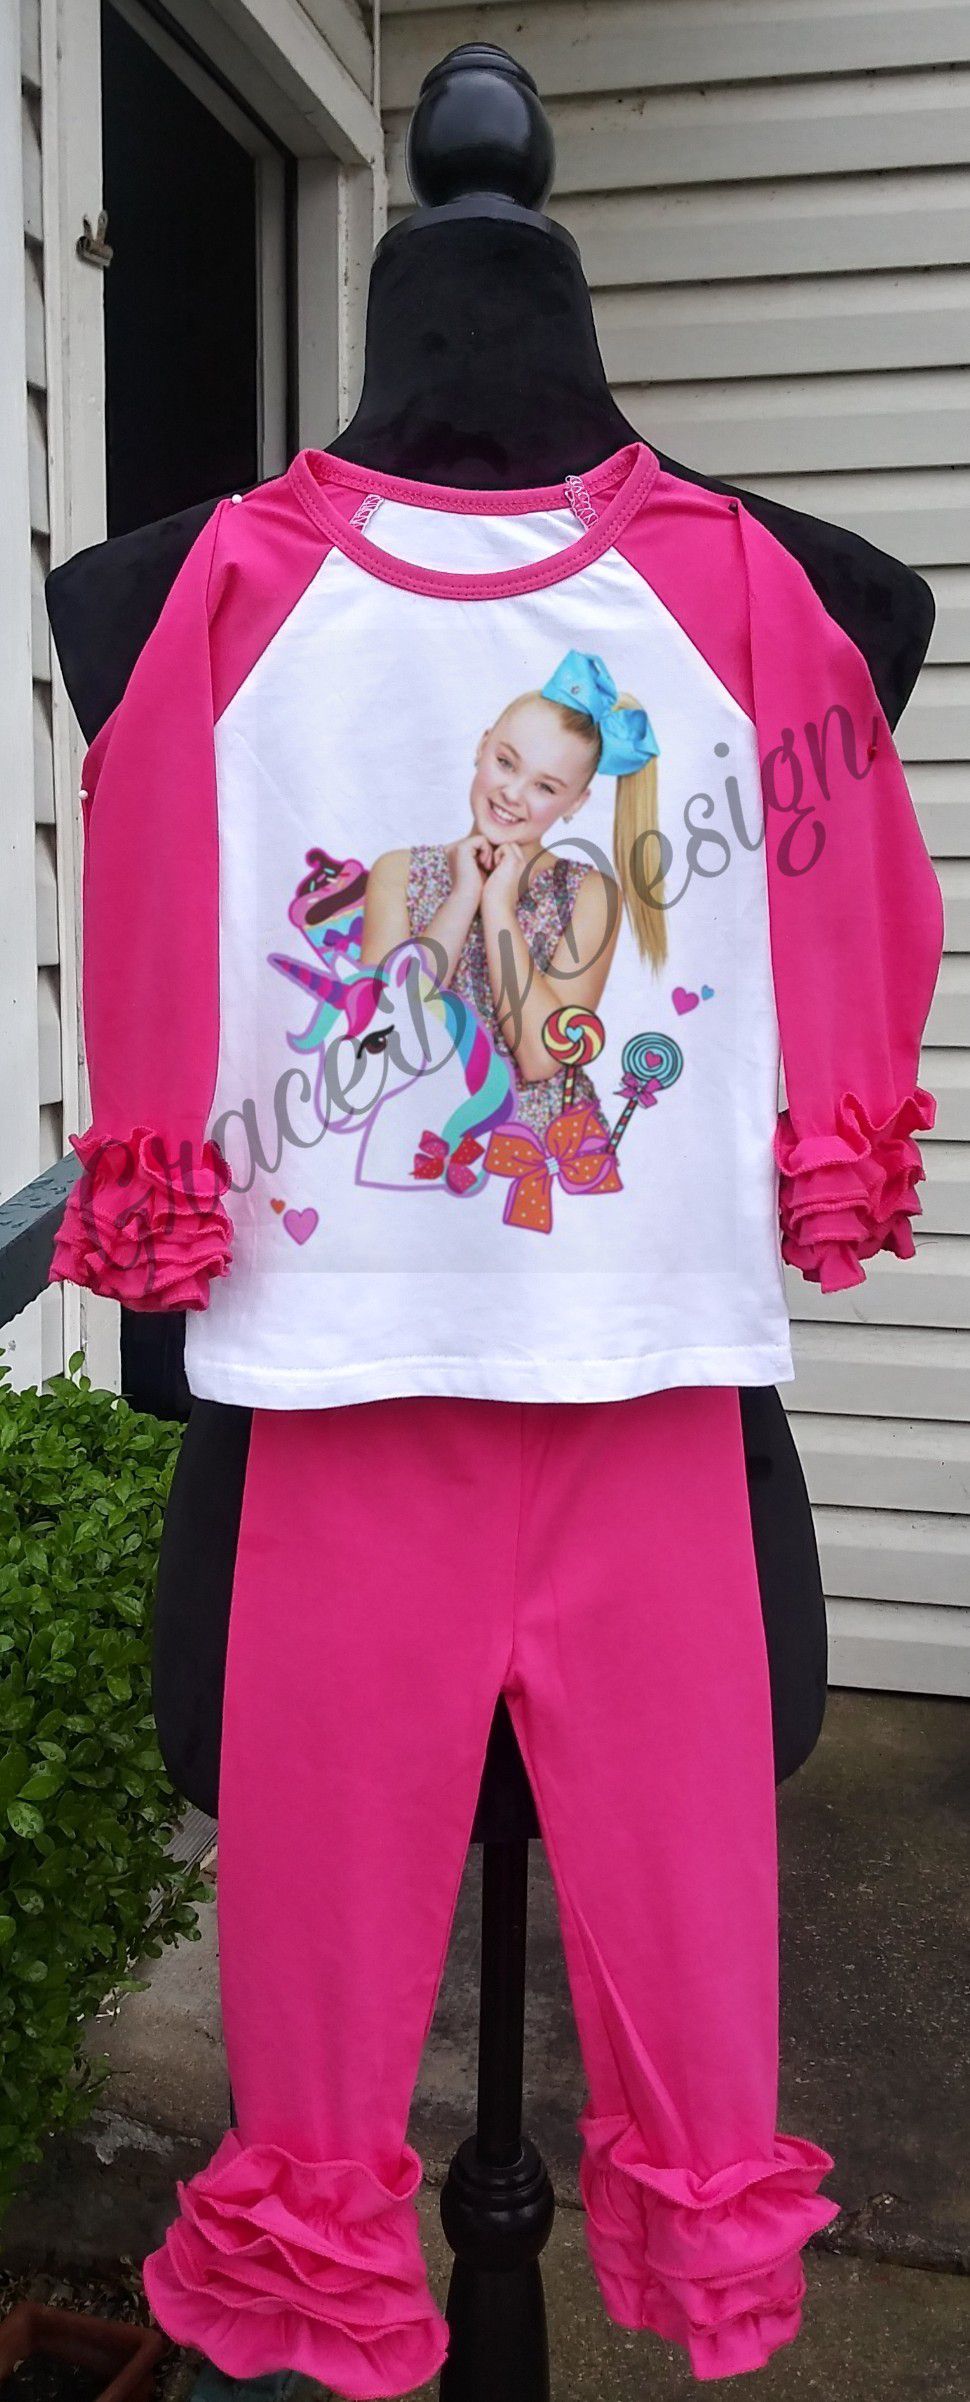 Jojo siwa unicorns candy outfit with shoe and bows